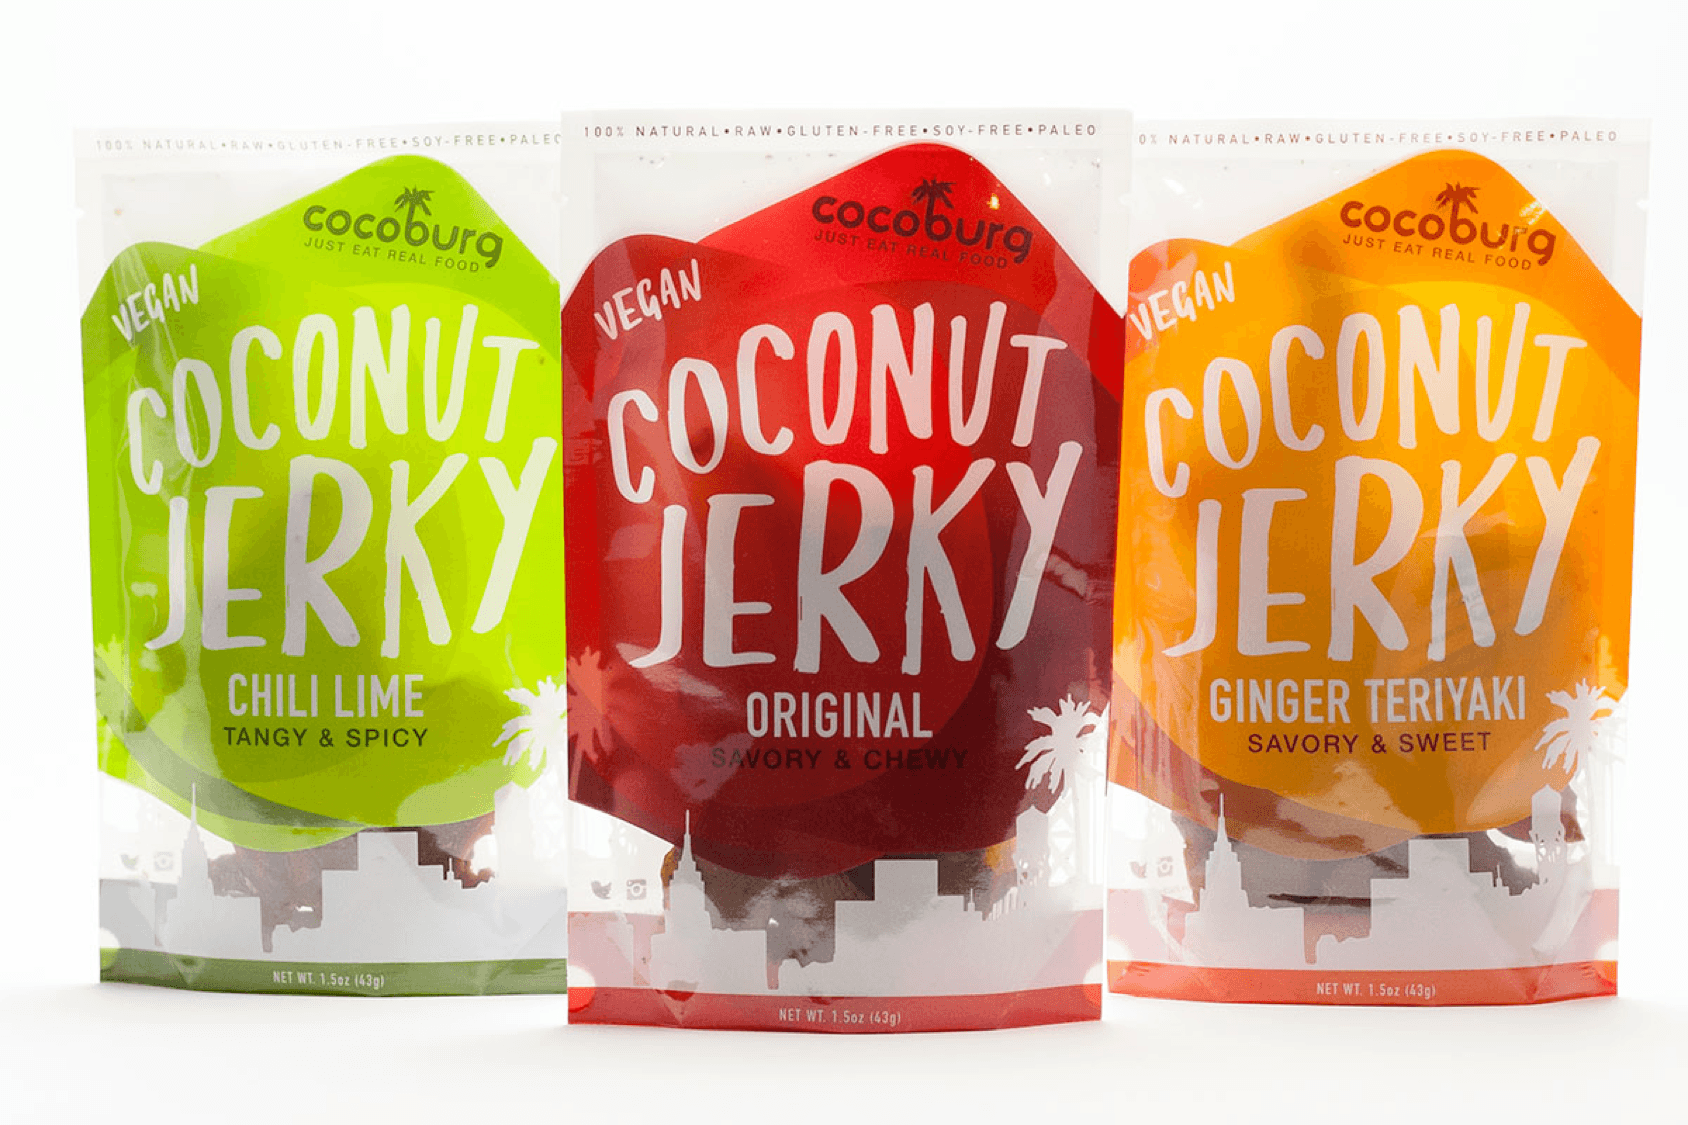 The creators of Coconut Jerky turned this byproduct into the first vegan beef-jerky alternative.